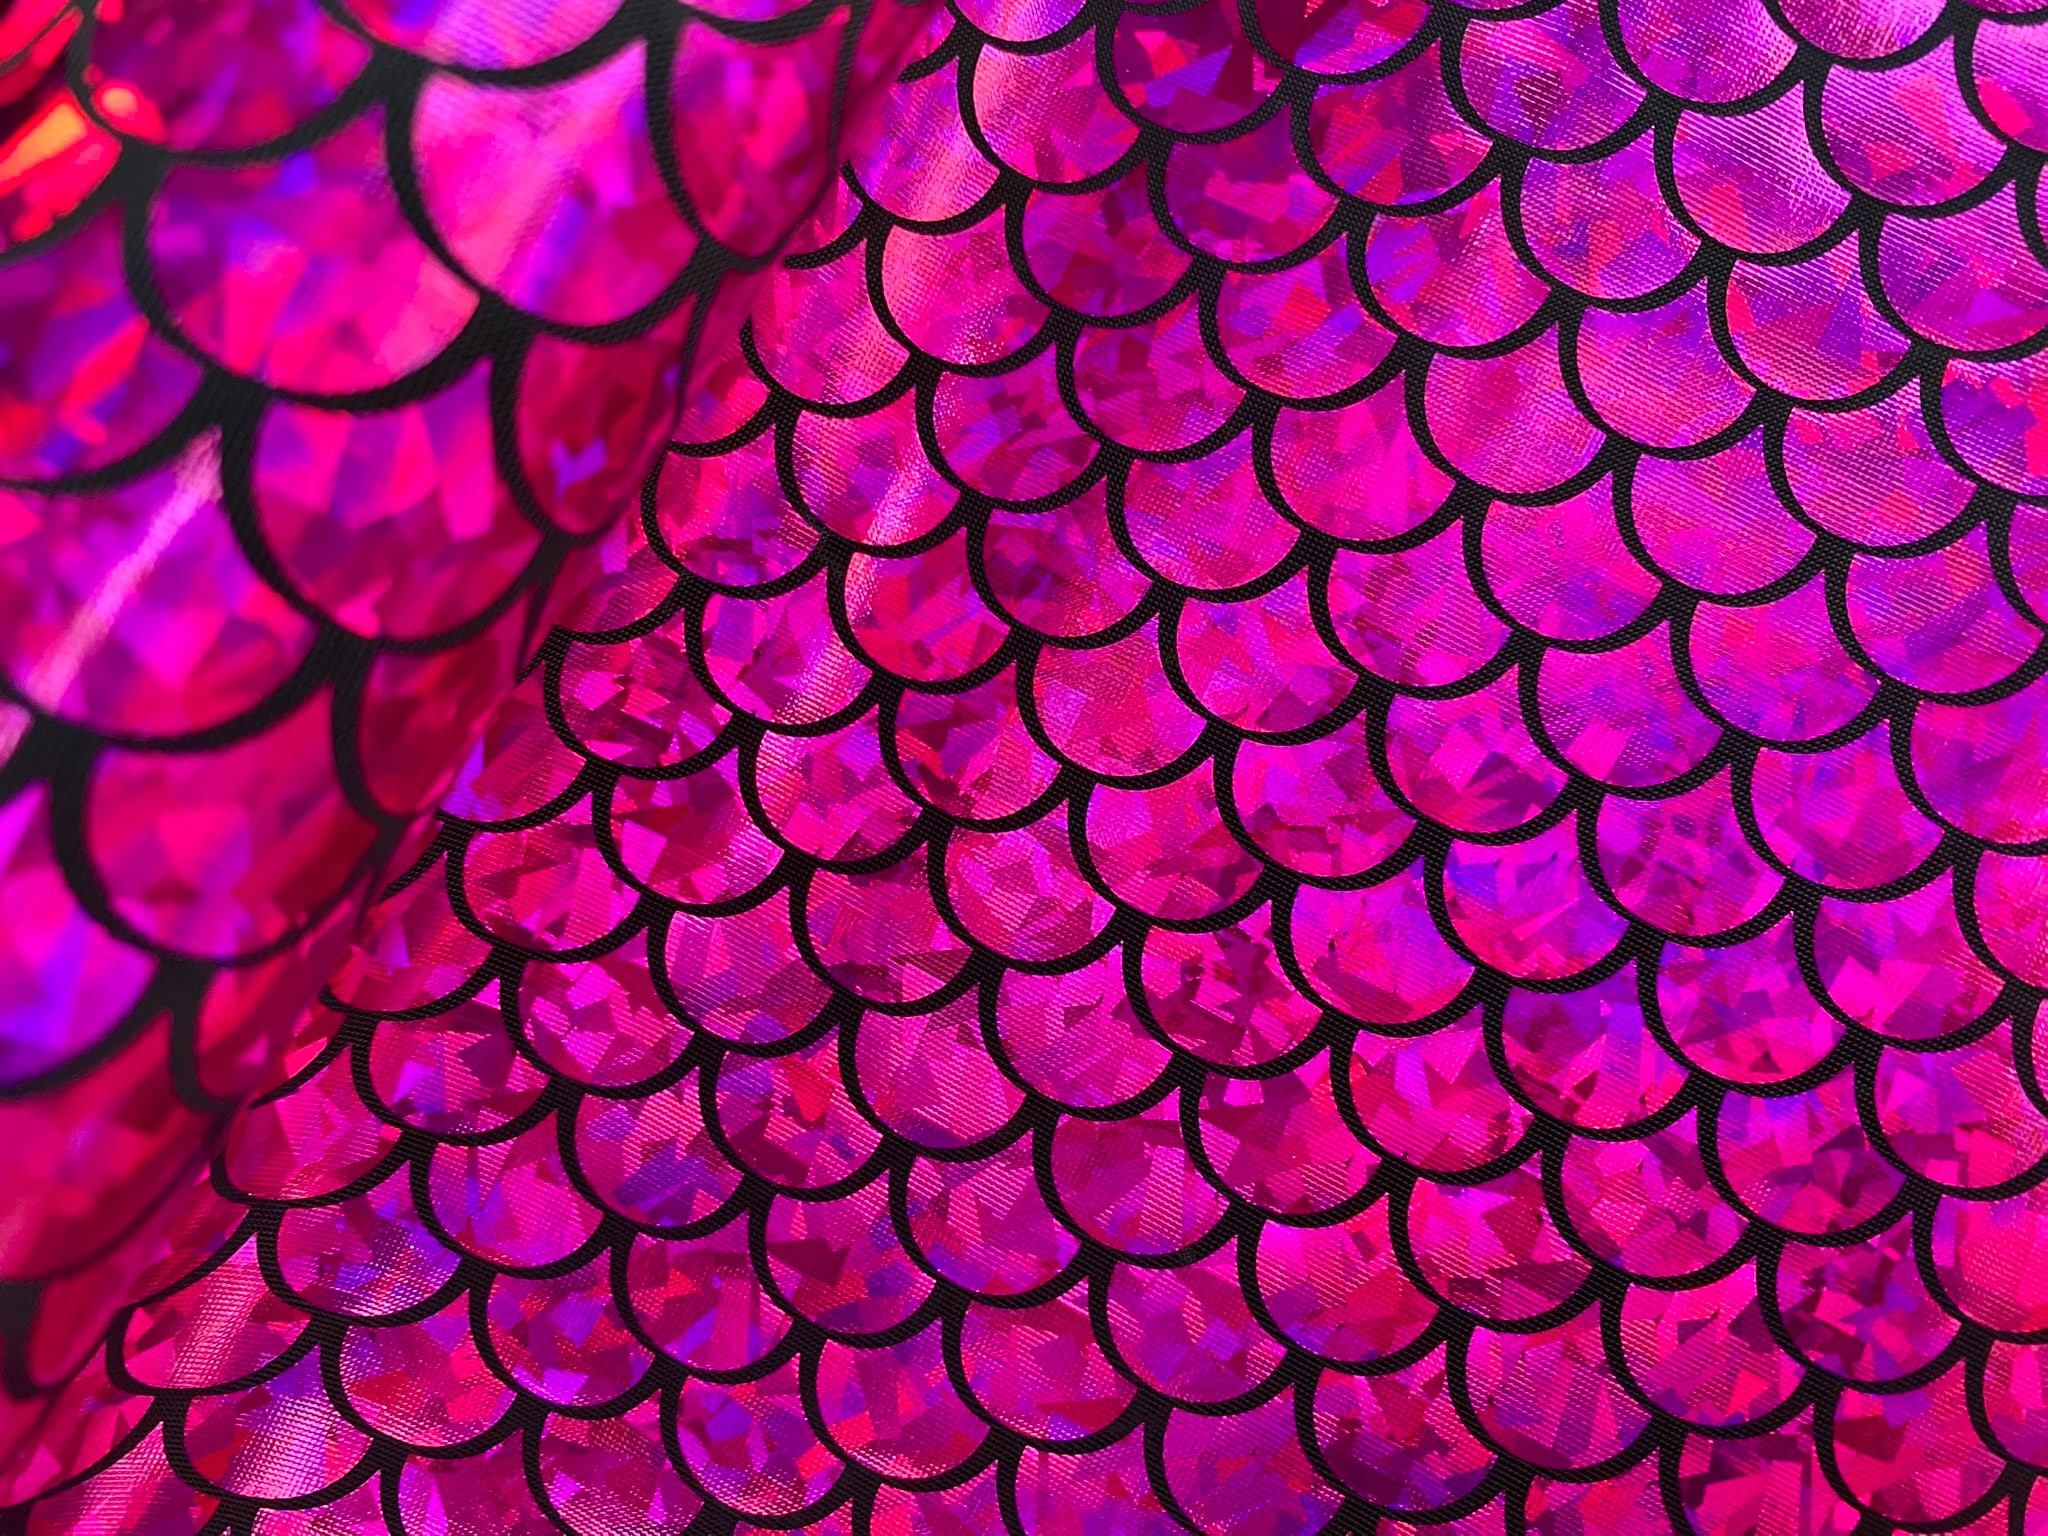 Mermaid Scale Fabric Fish Tale Foil Iridescent Stretch Spandex Material -  150cm wide - Green on Black - Lush Fabric